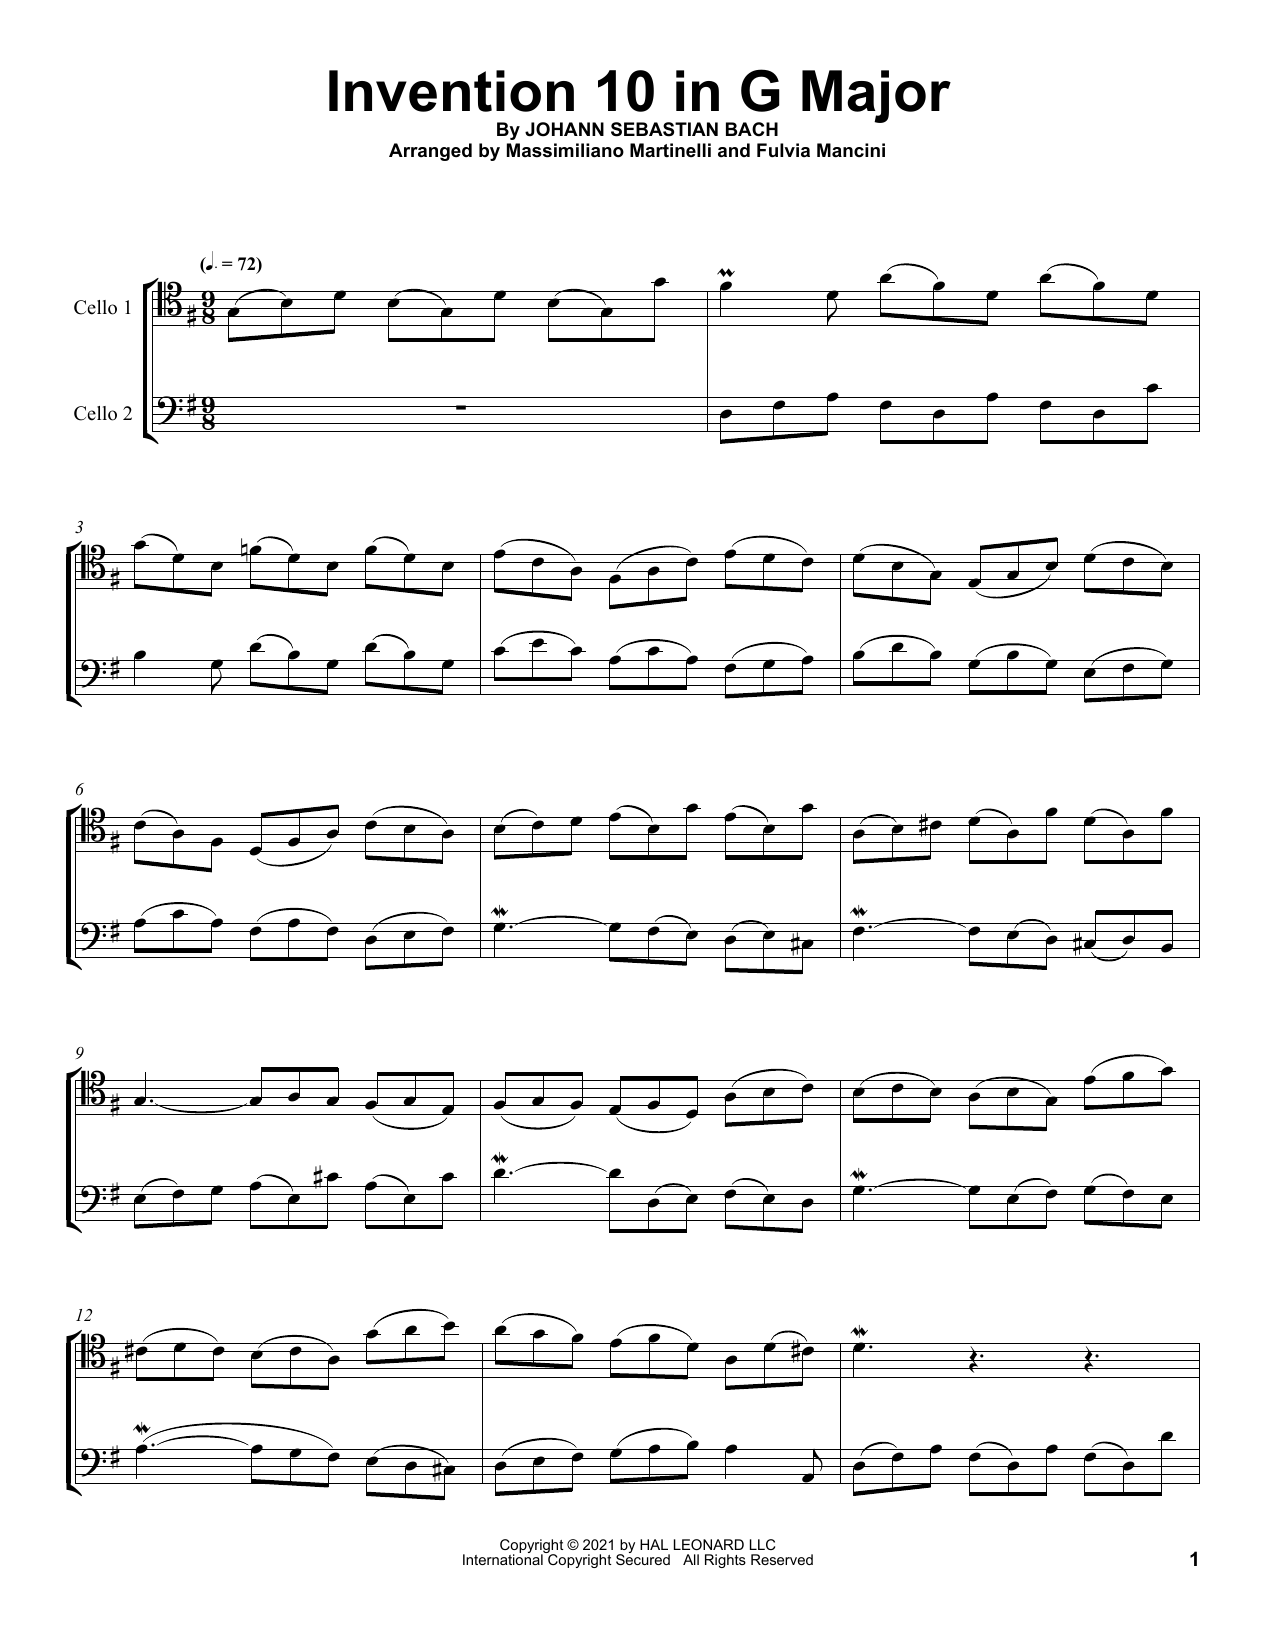 Download Mr & Mrs Cello Invention 10 In G Major Sheet Music